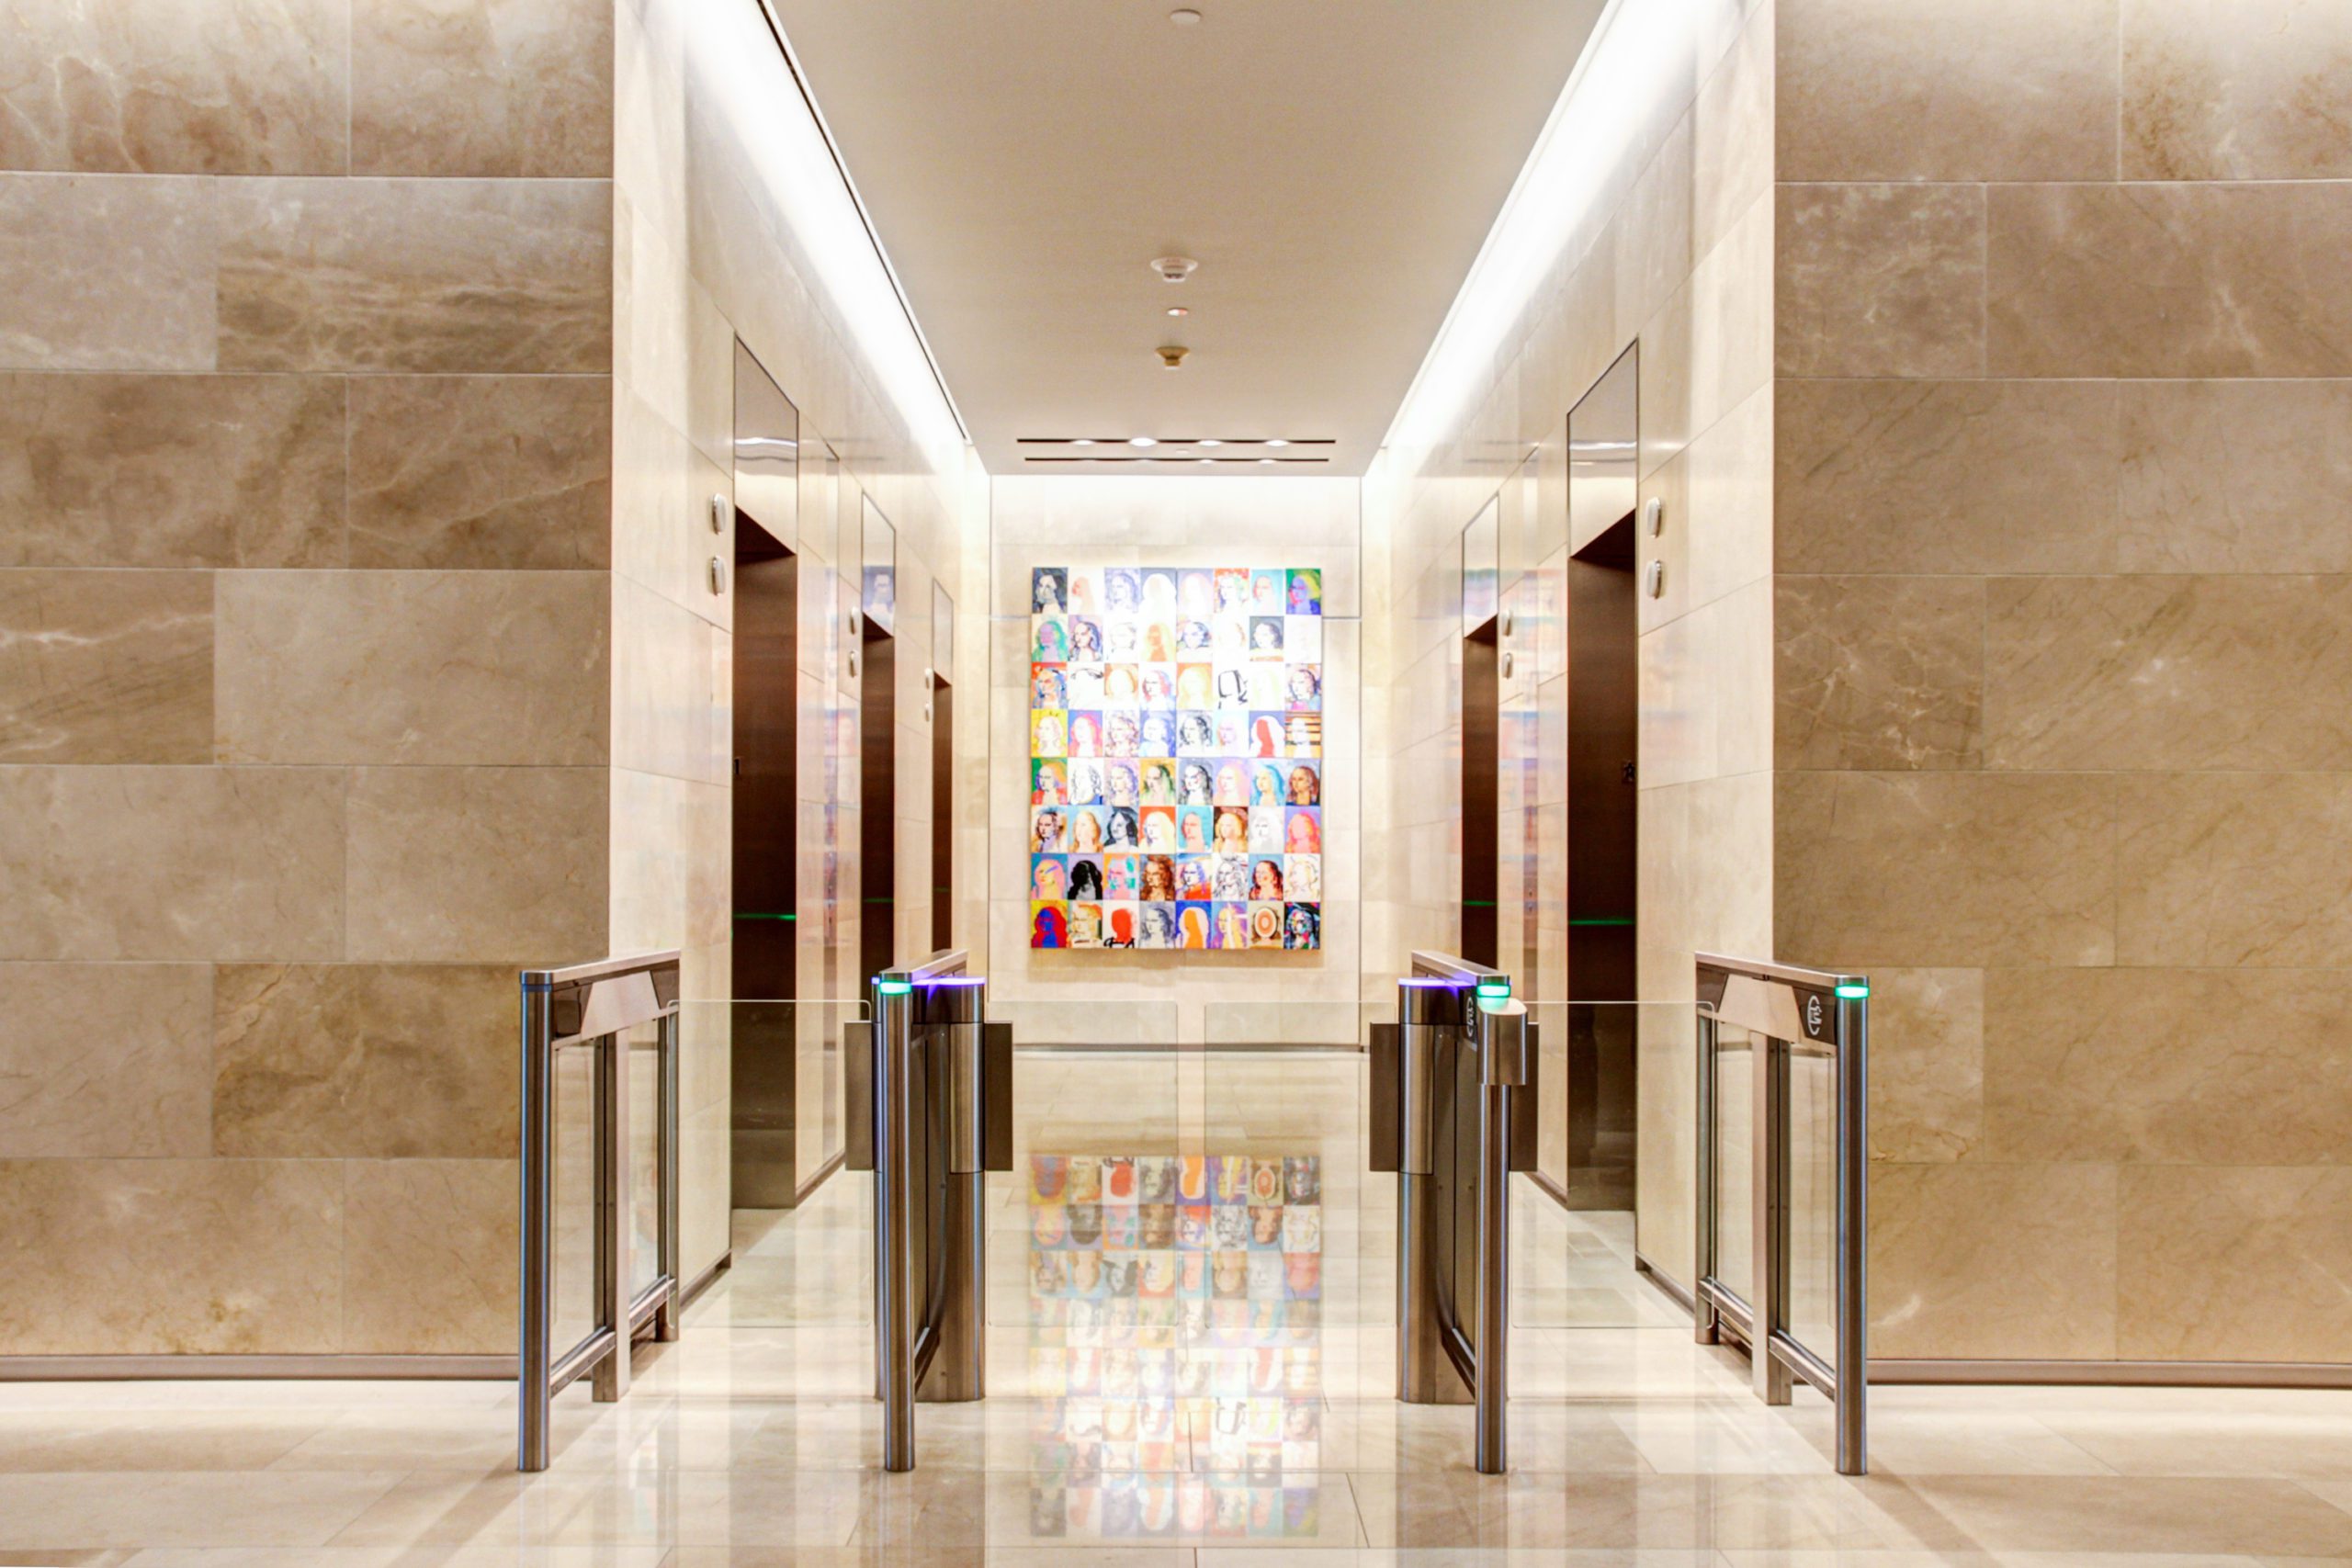 Elevator bays in lobby of 1330 Connecticut Avenue.